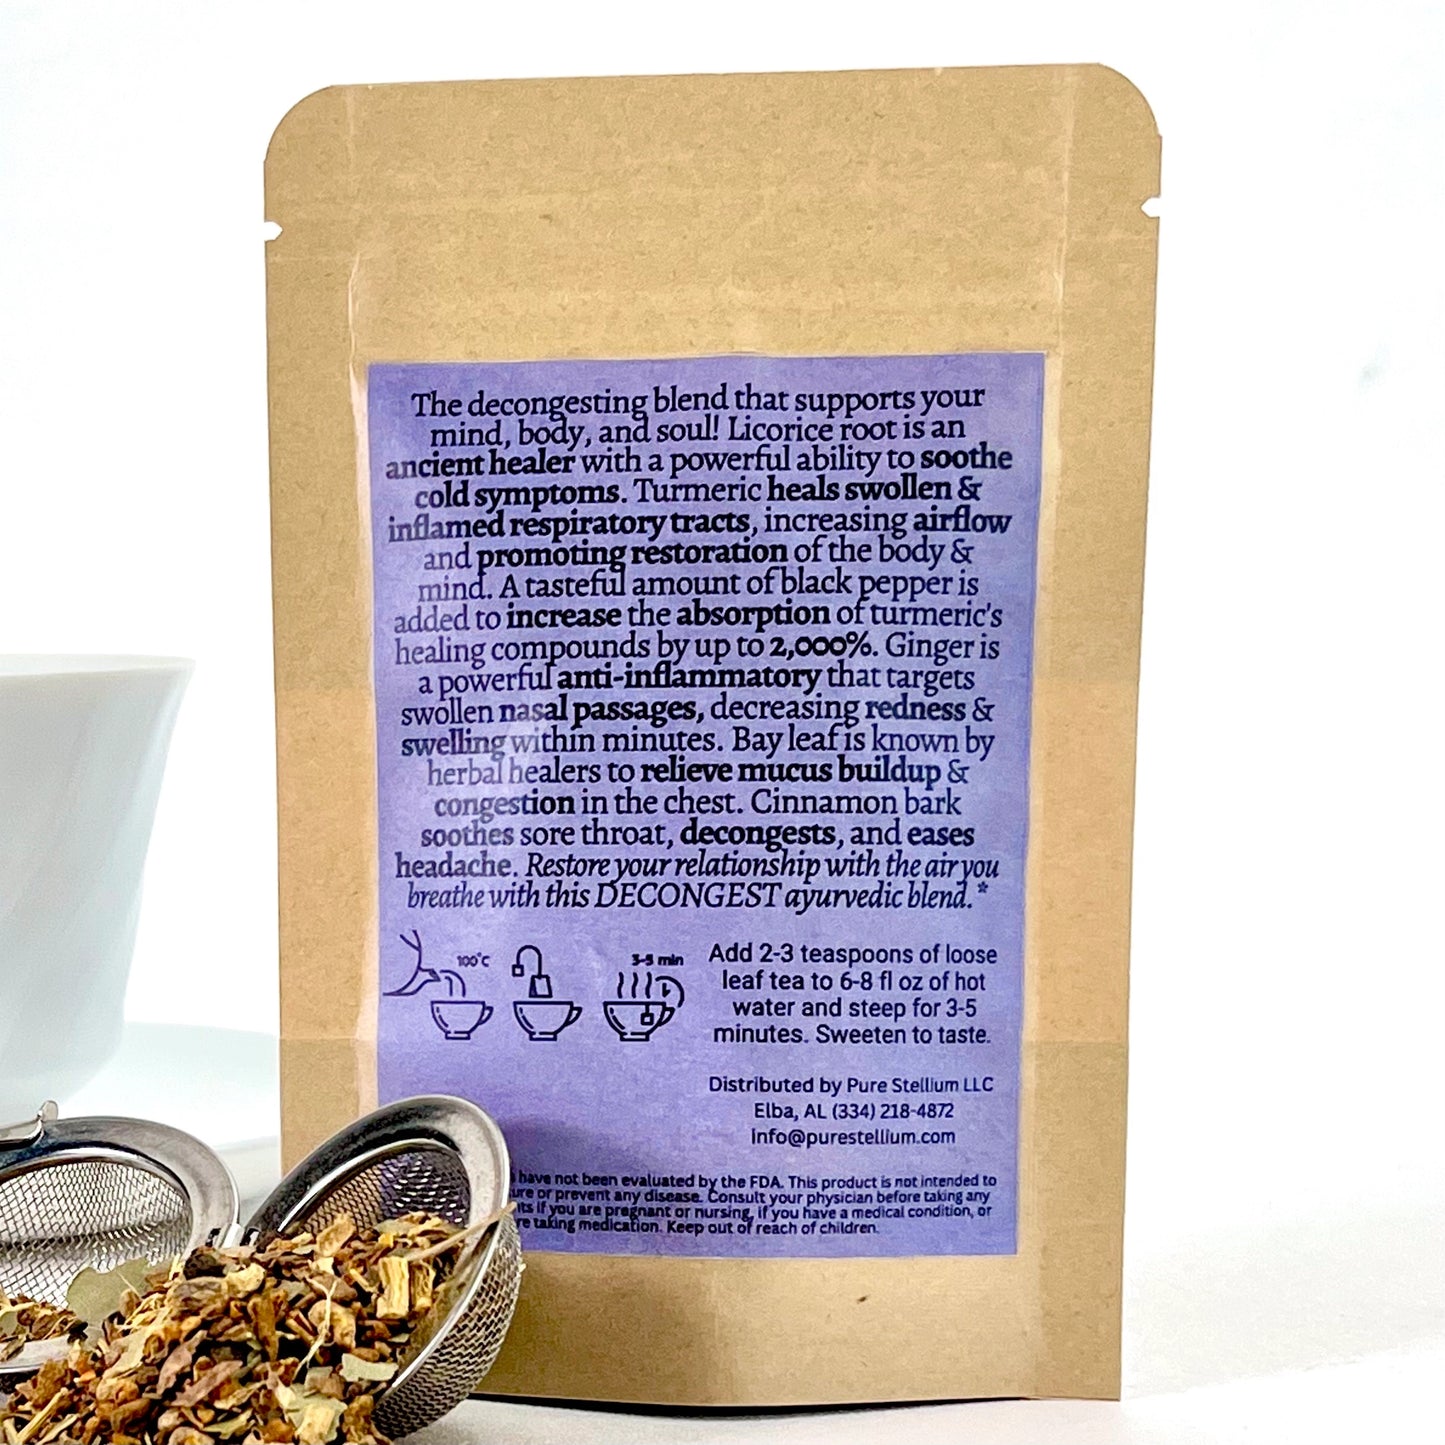 The package an Elemental Life Product's decongesting loose leaf tea product with raw ingredients and a tea ball